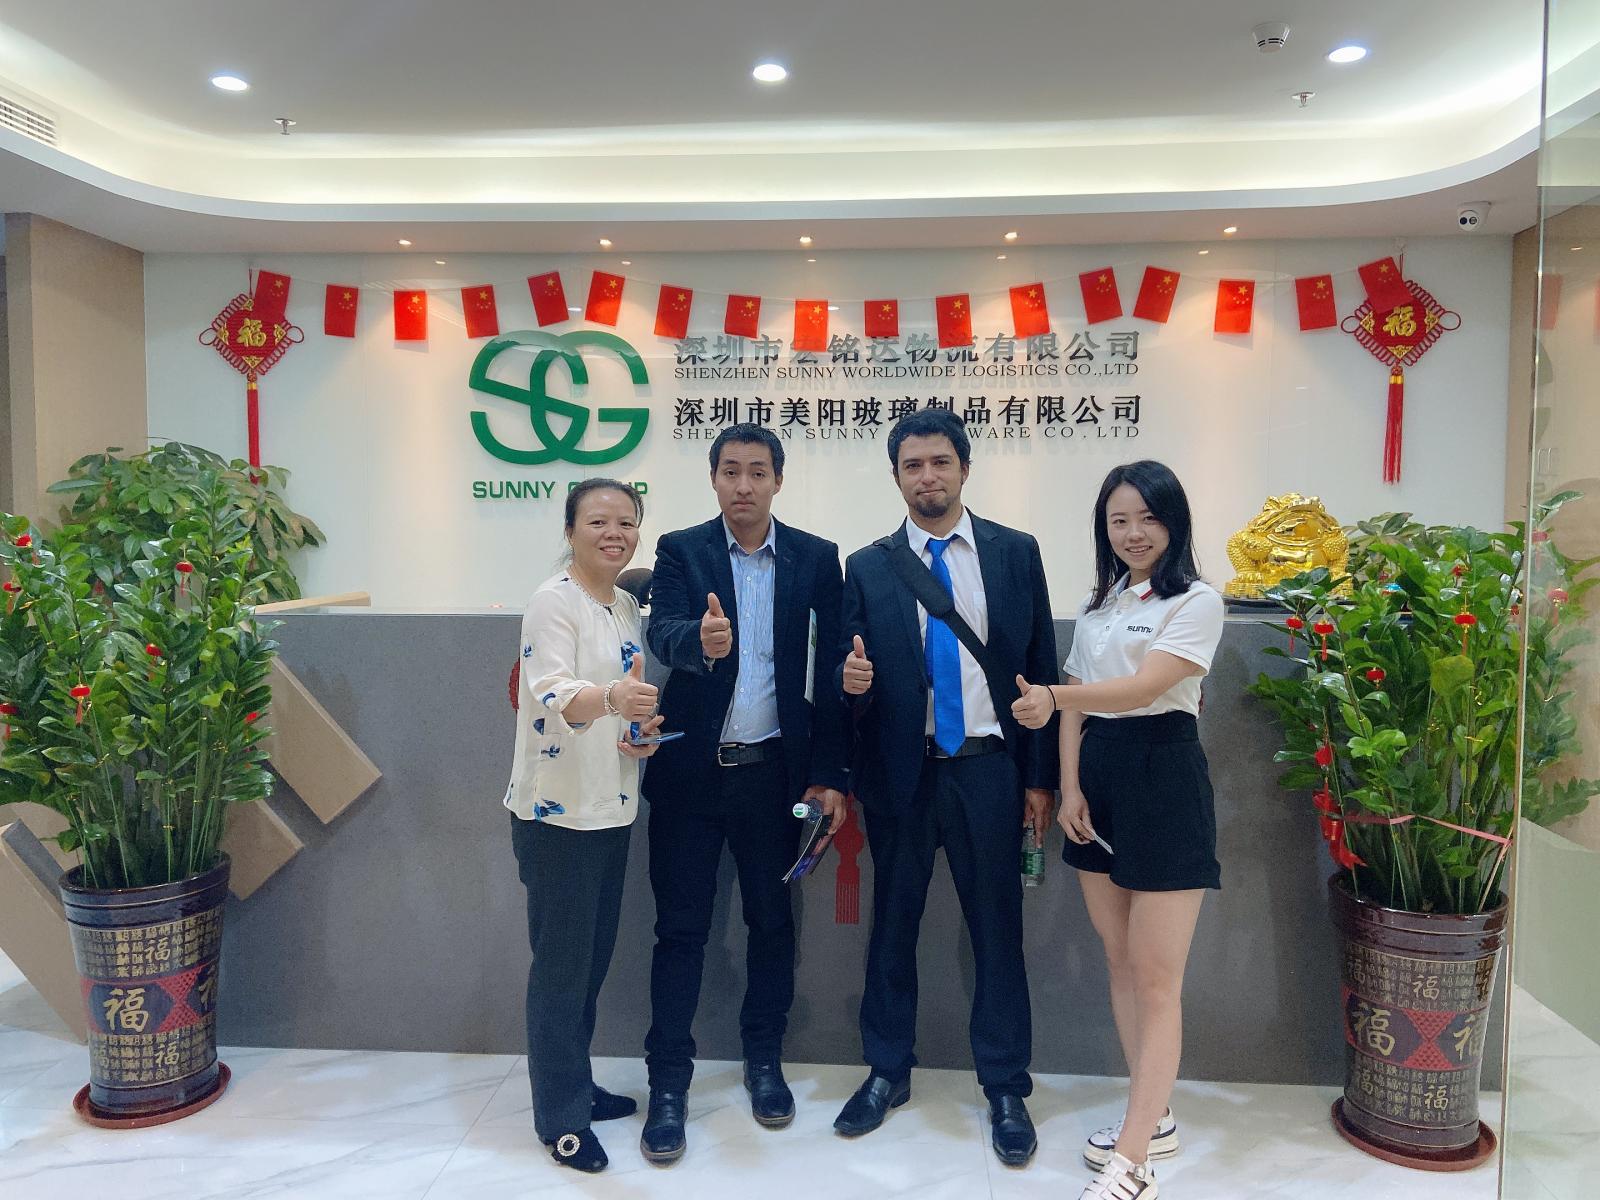  China freight forwarder sea shipping from Guangzhou to Thailand